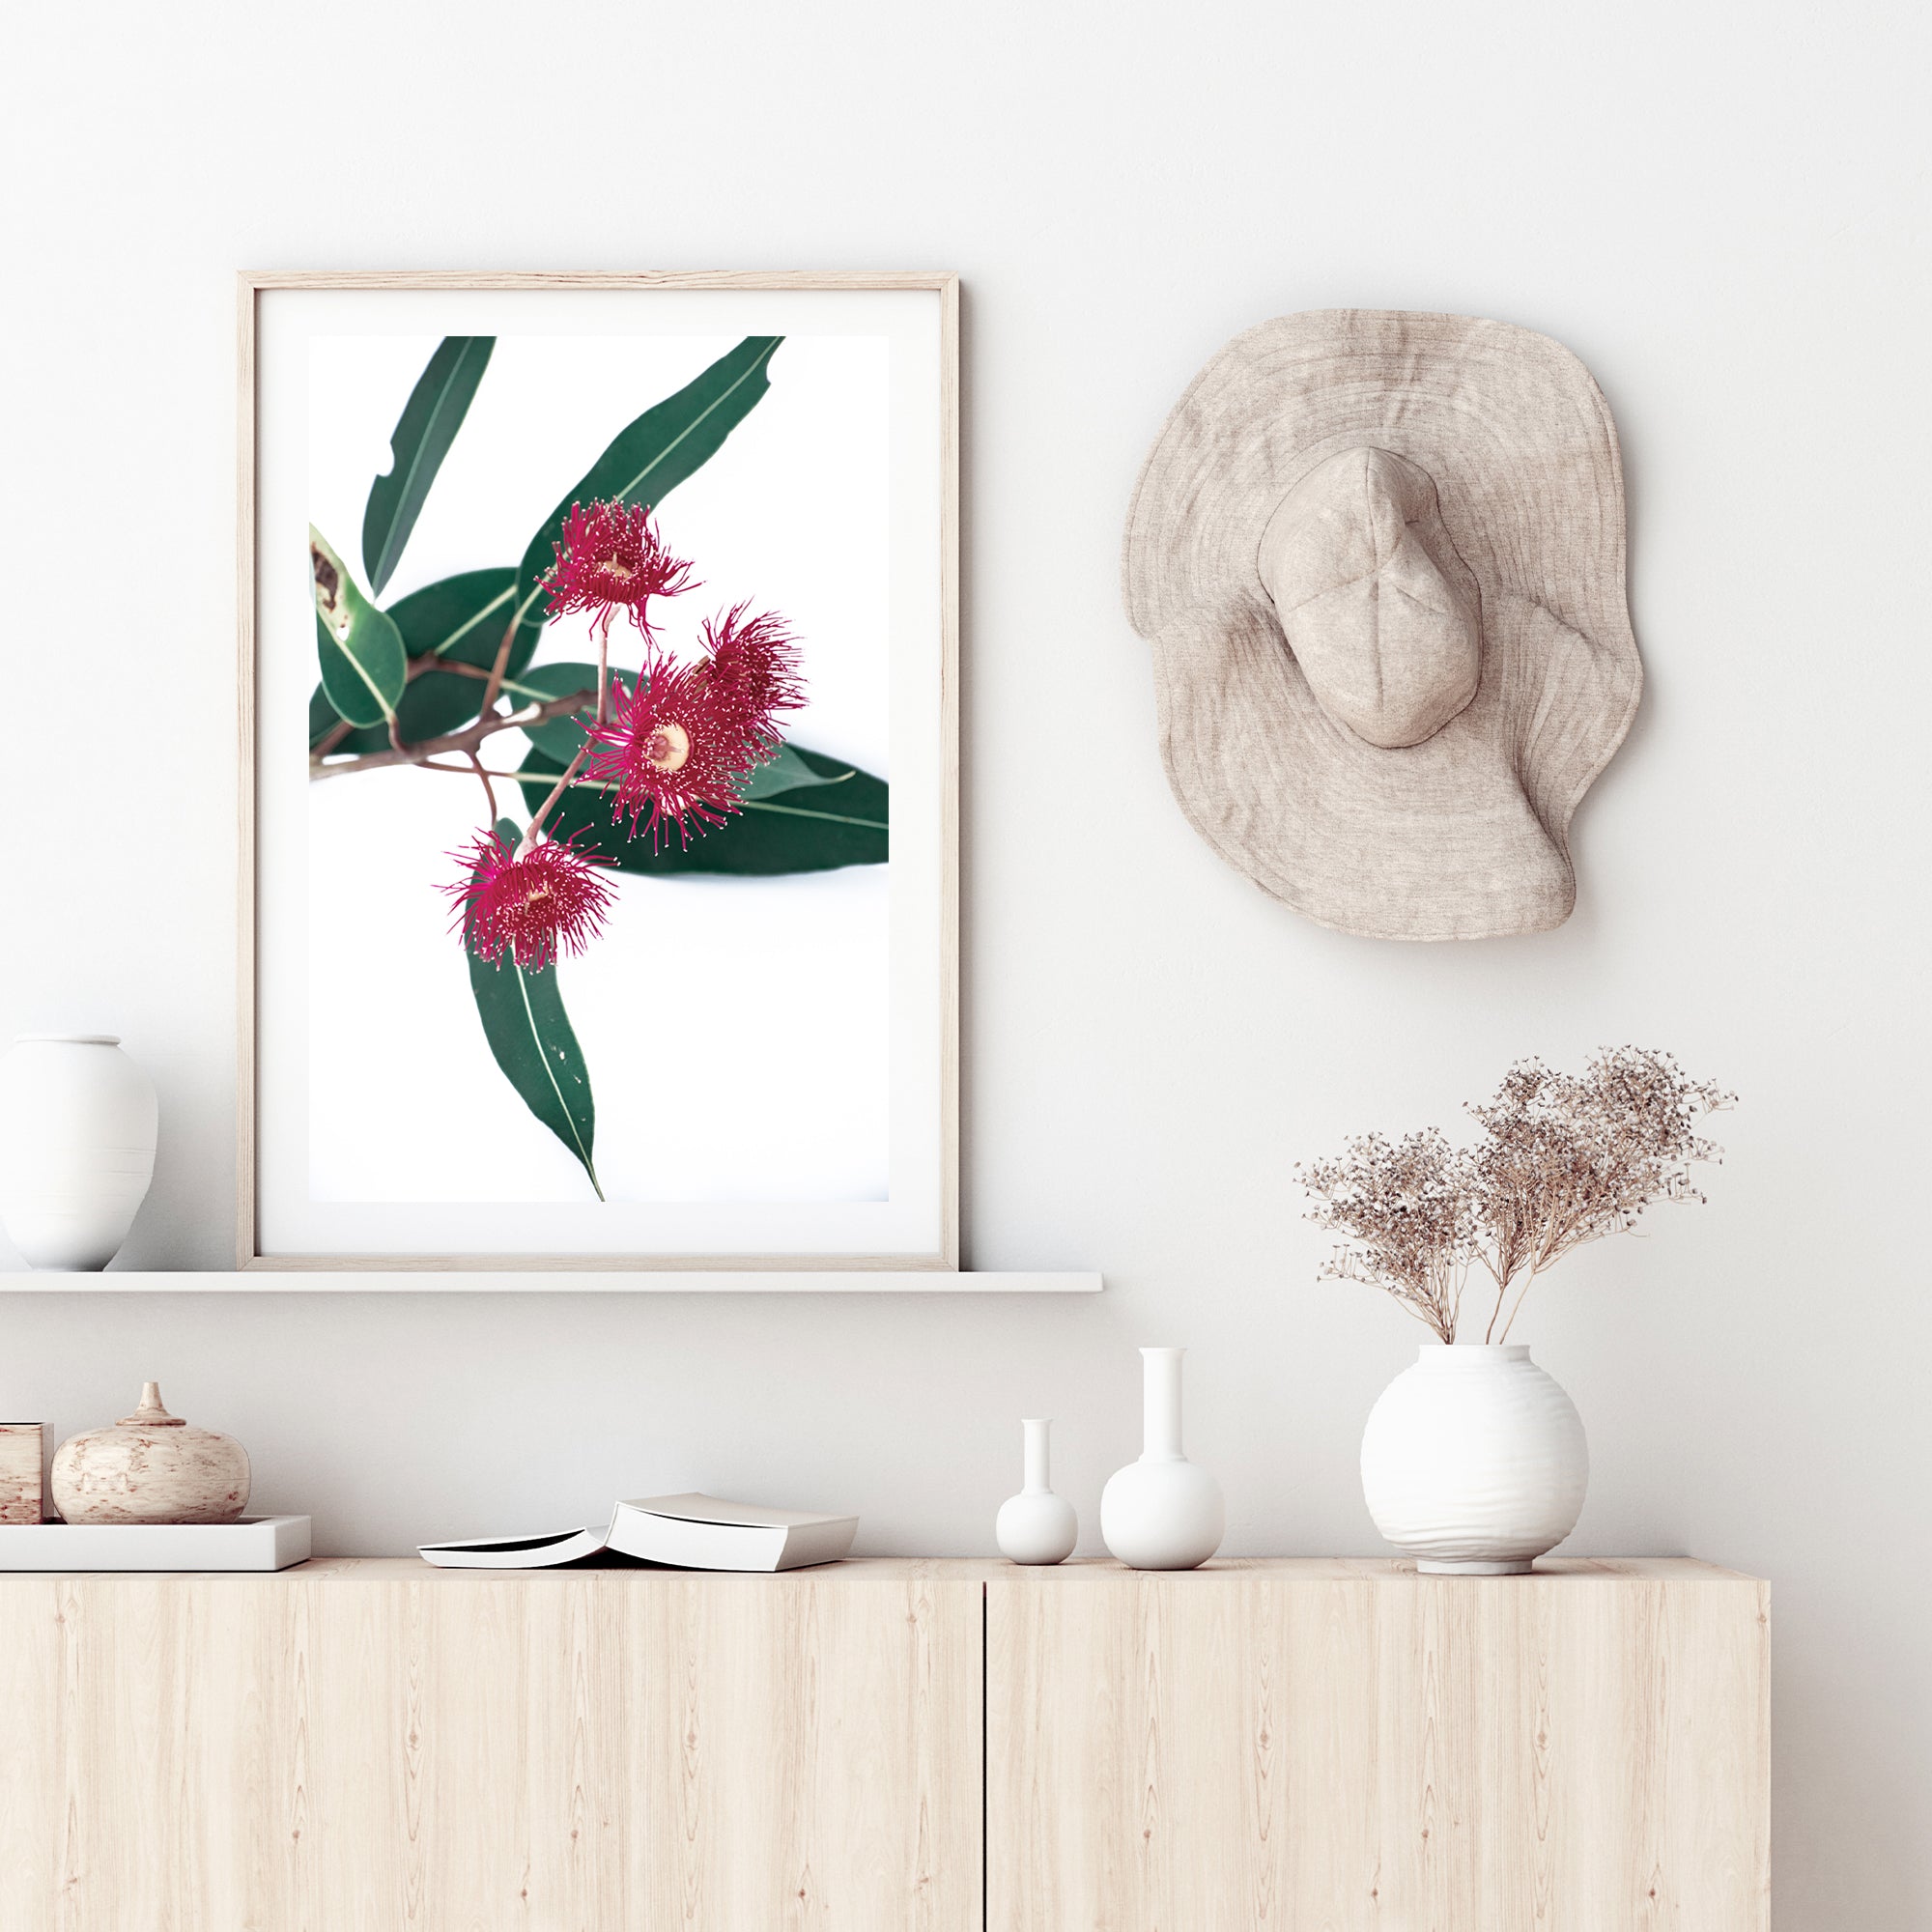 A photo floral wall art featuring green eucalyptus leaves and beautiful red wild flowers, available framed or unframed.